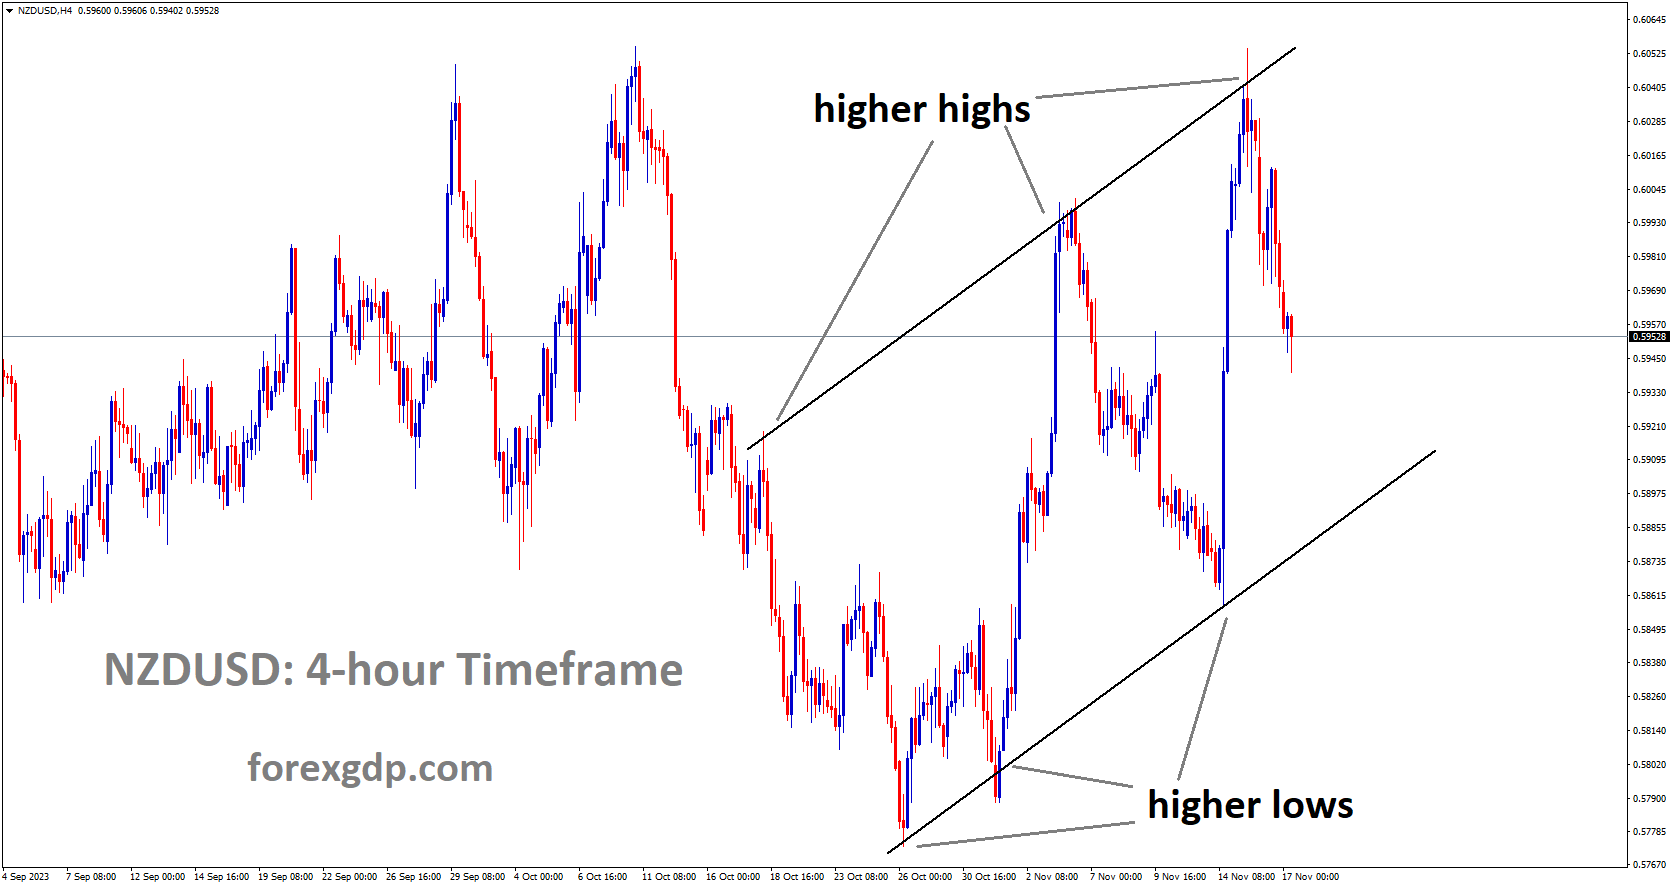 NZDUSD moving in a ascending channel and the market has fallen from the higher high area of the channel